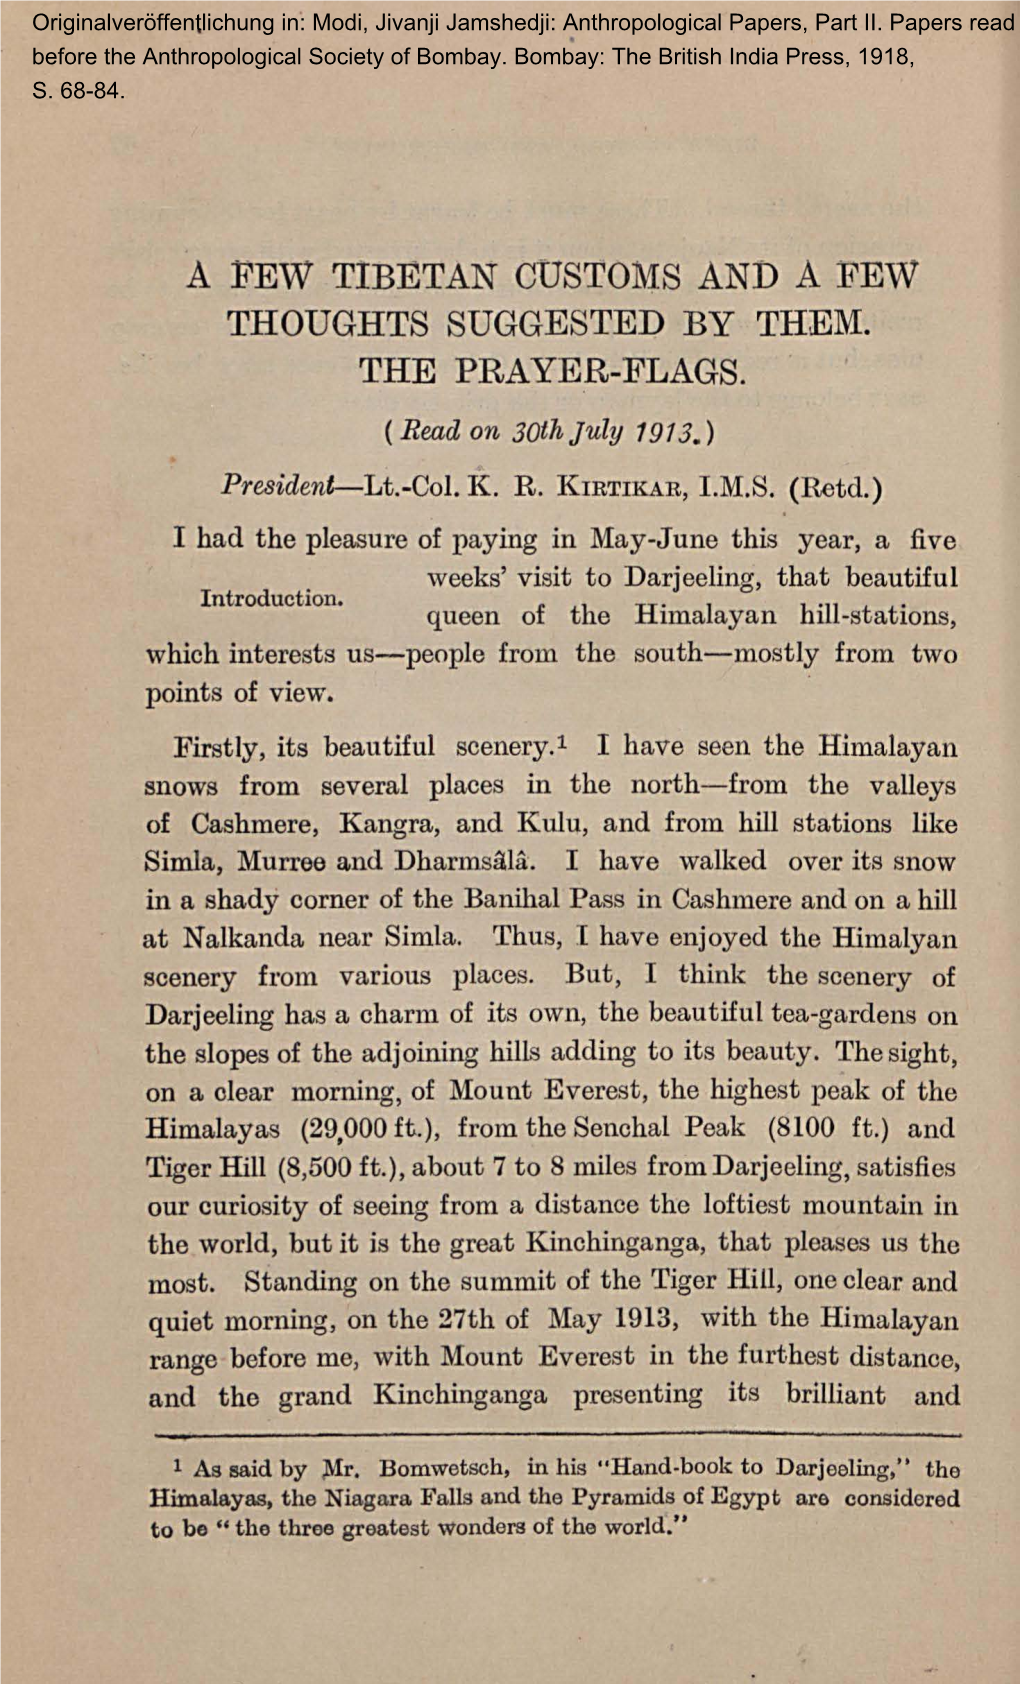 A FEW TIBETAN CUSTOMS and a FEW THOUGHTS SUGGESTED by THEM. the PRAYER-FLAGS. (Read on 30Th July 1913.)